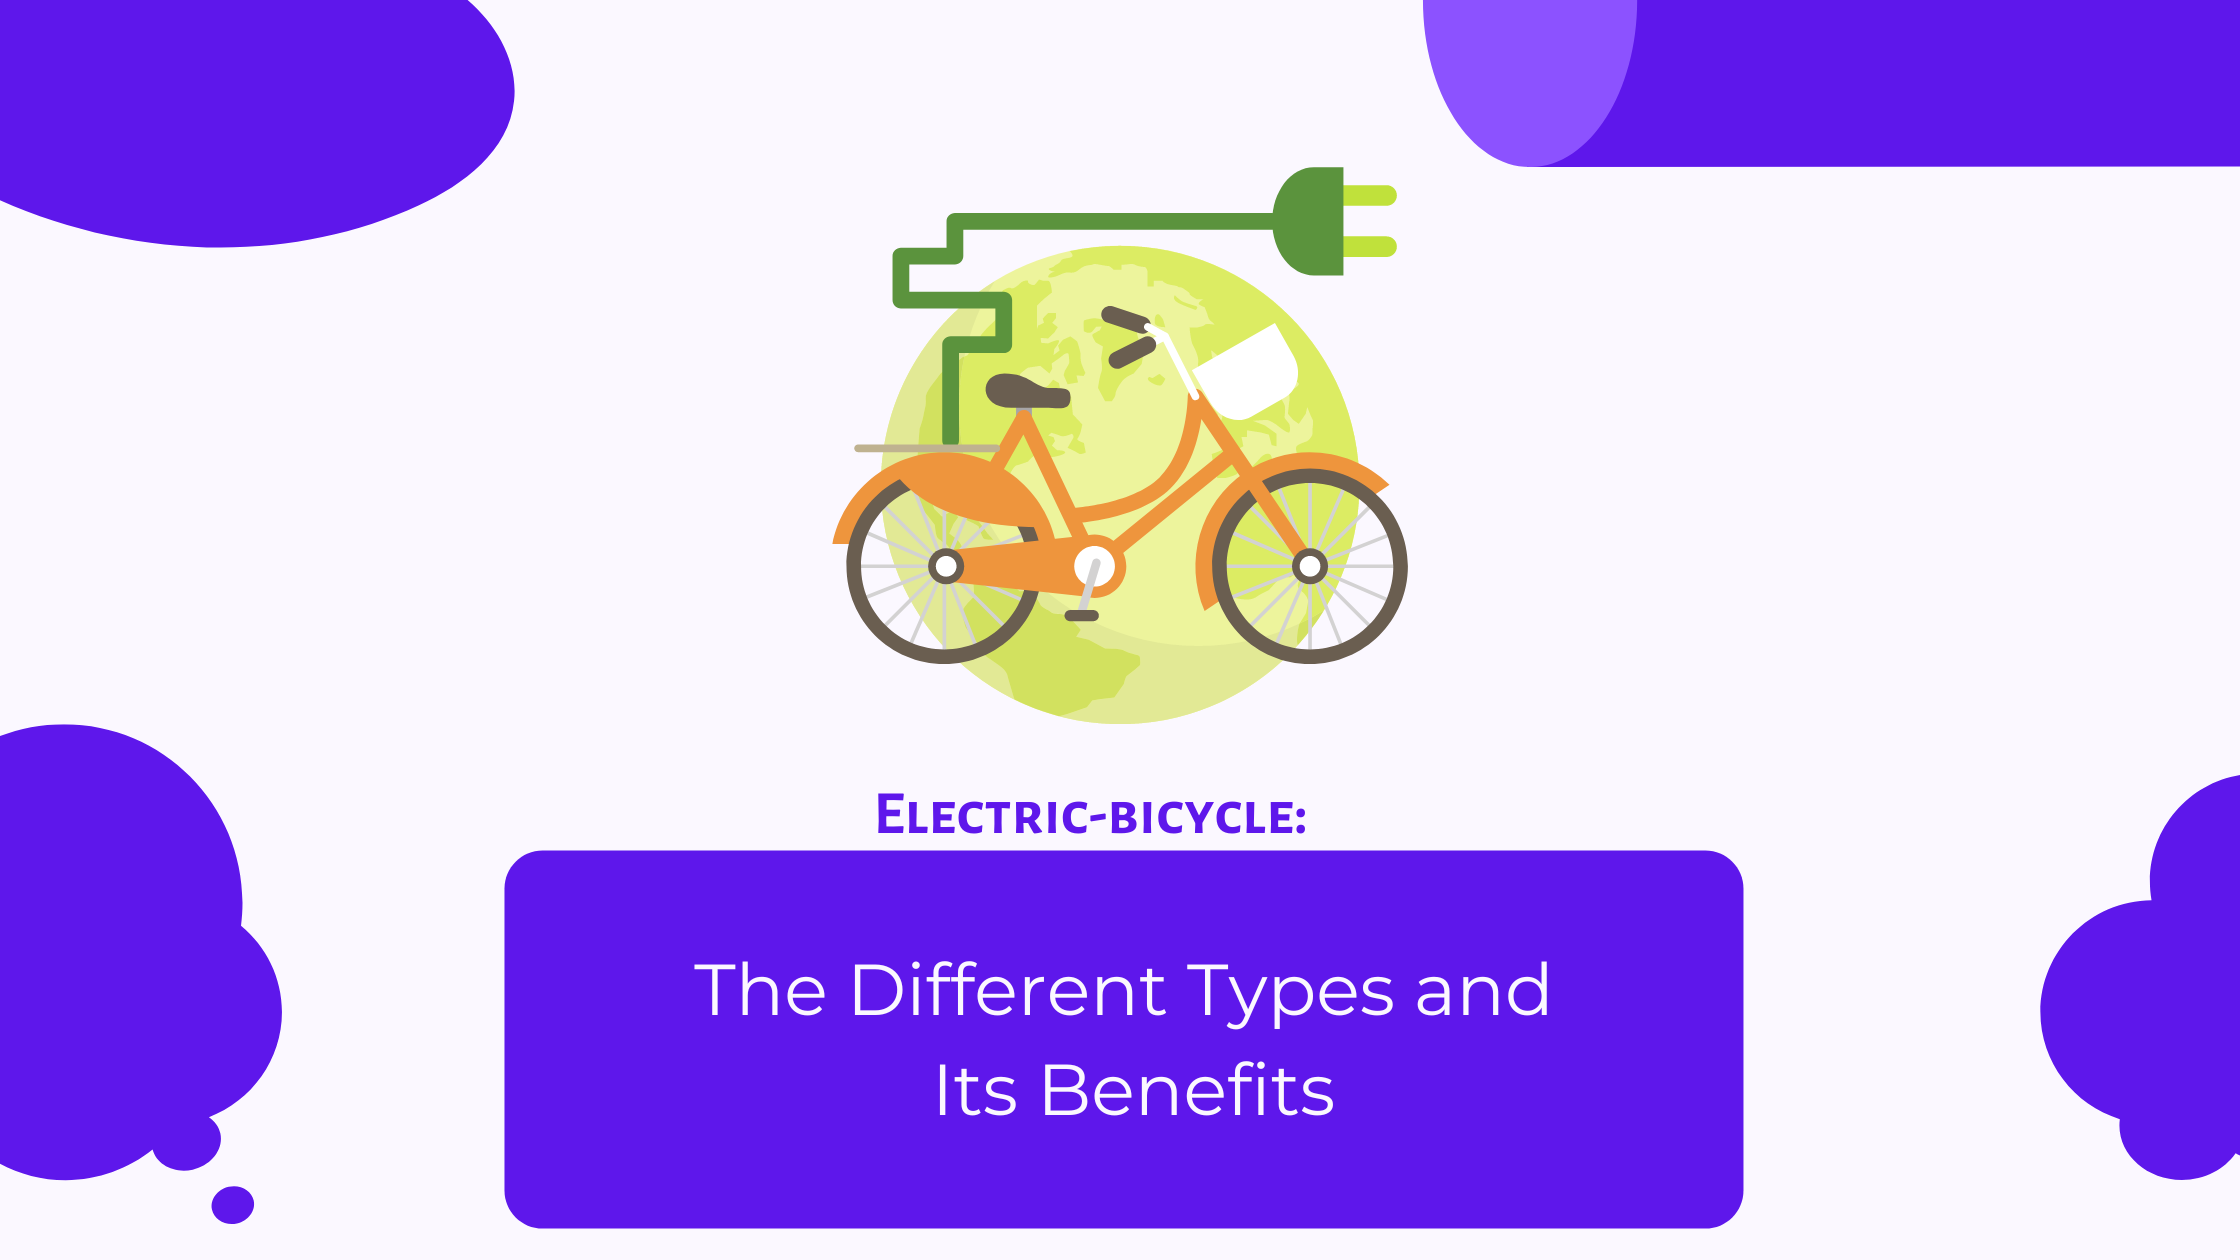 Electric-bicycle The Different Types and Its Benefits